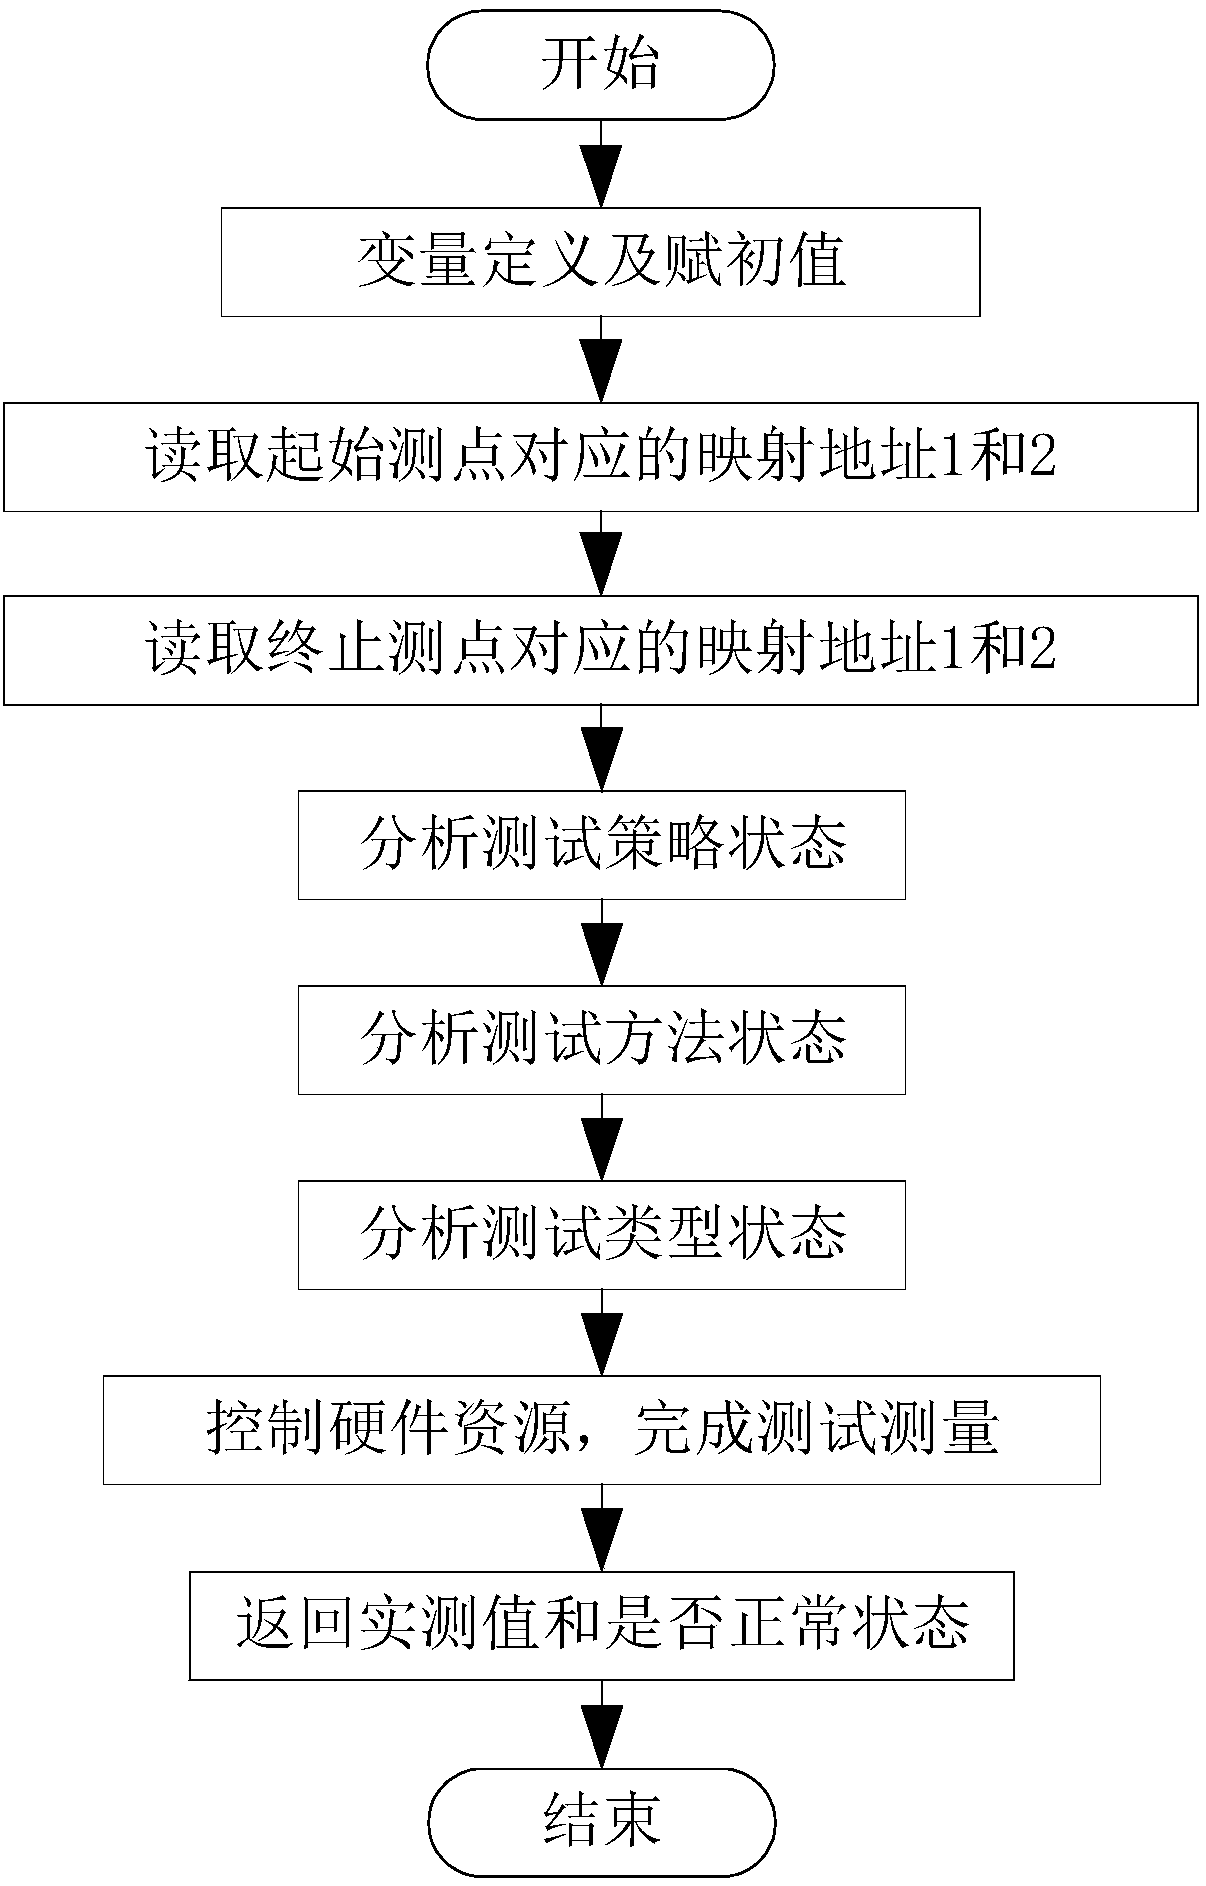 Automatic test control method for automatic comprehensive seat electrical accessory detection equipment